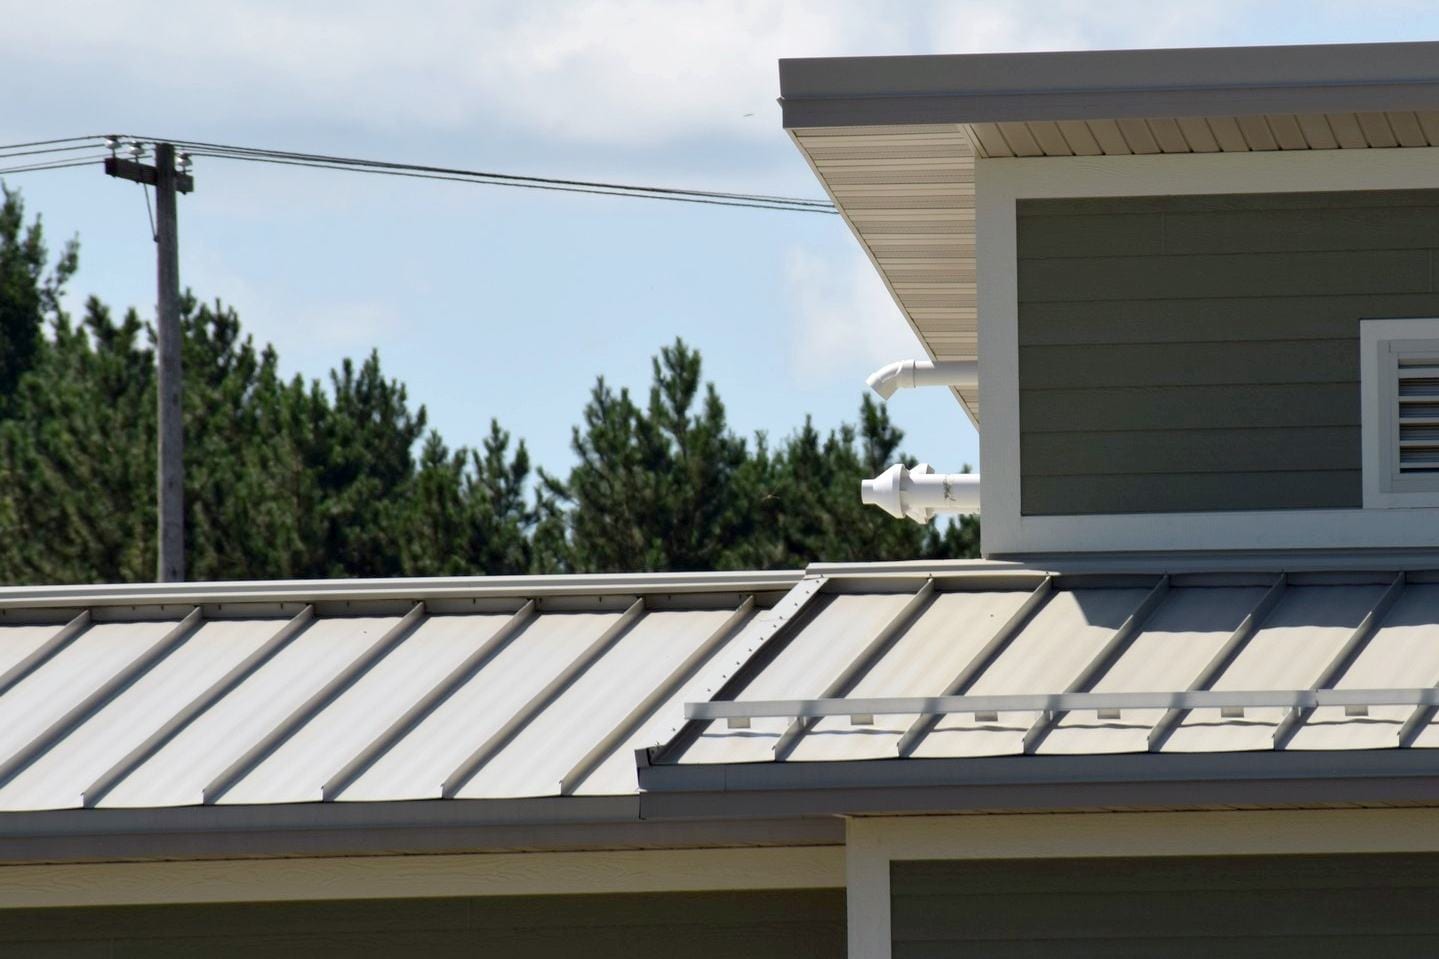 Metal Roofing and Cellular Service